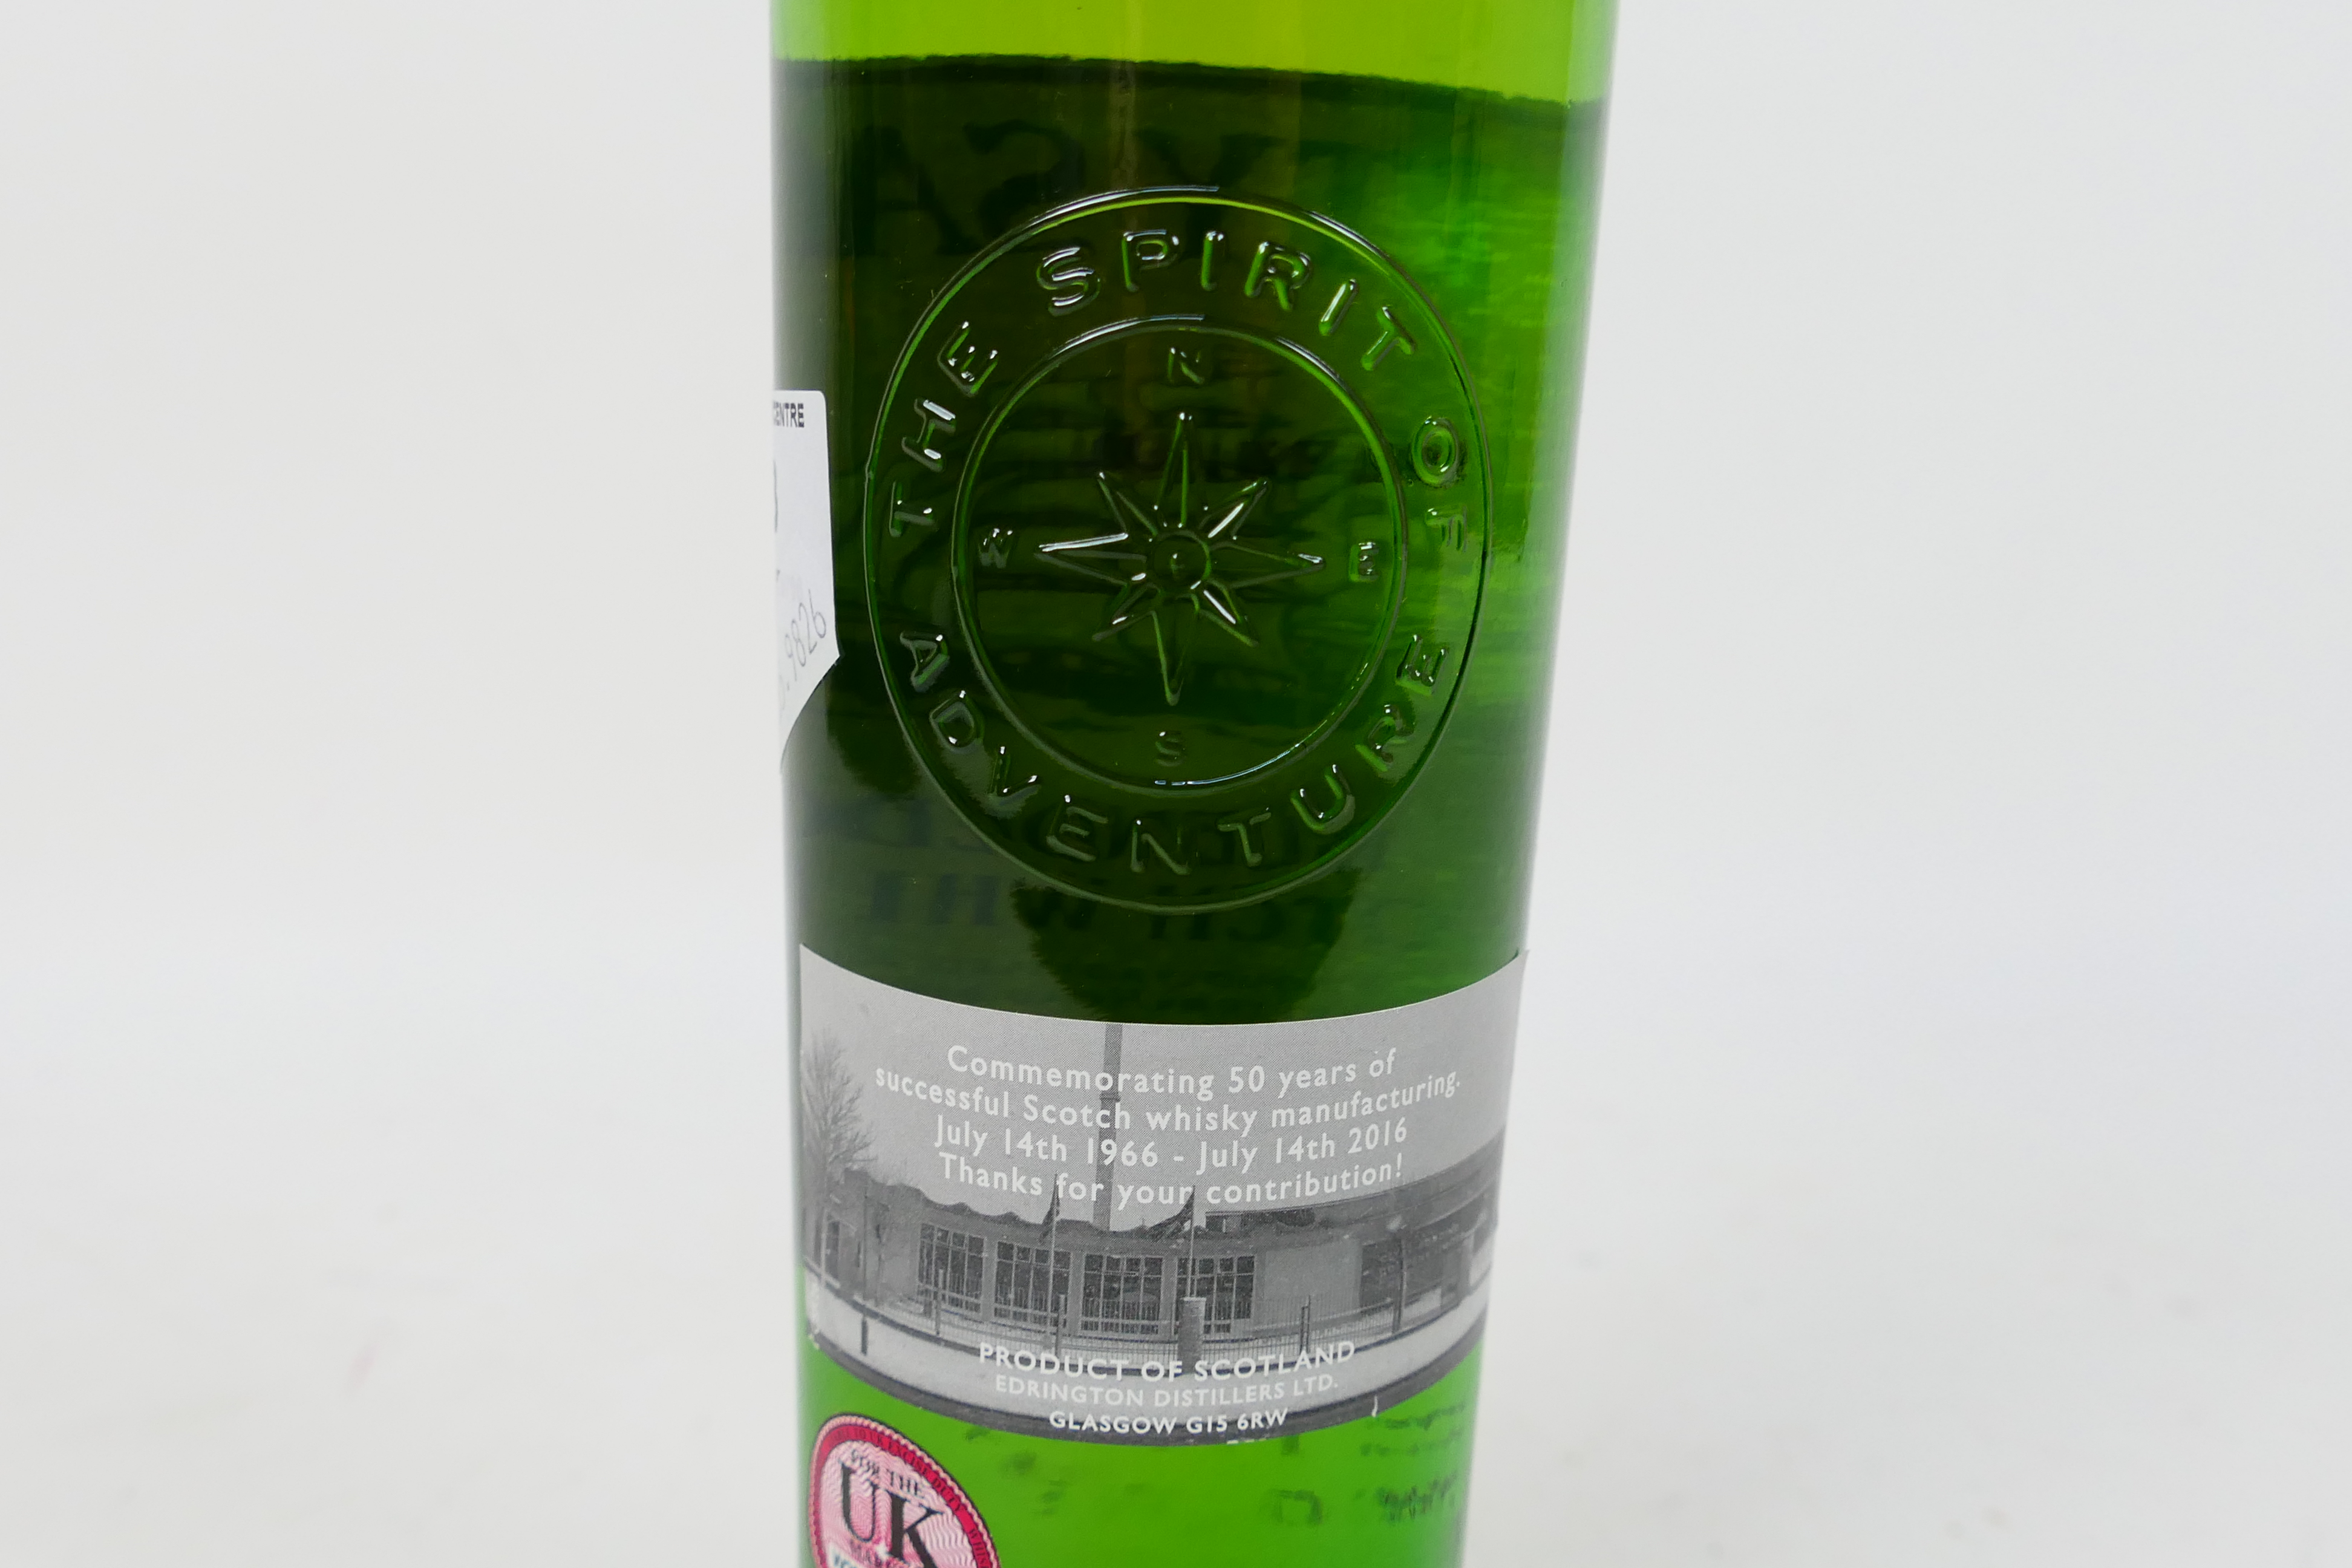 A 70cl bottle of Cutty Sark whisky, 50th Anniversary bottling, 40% abv. - Image 4 of 4